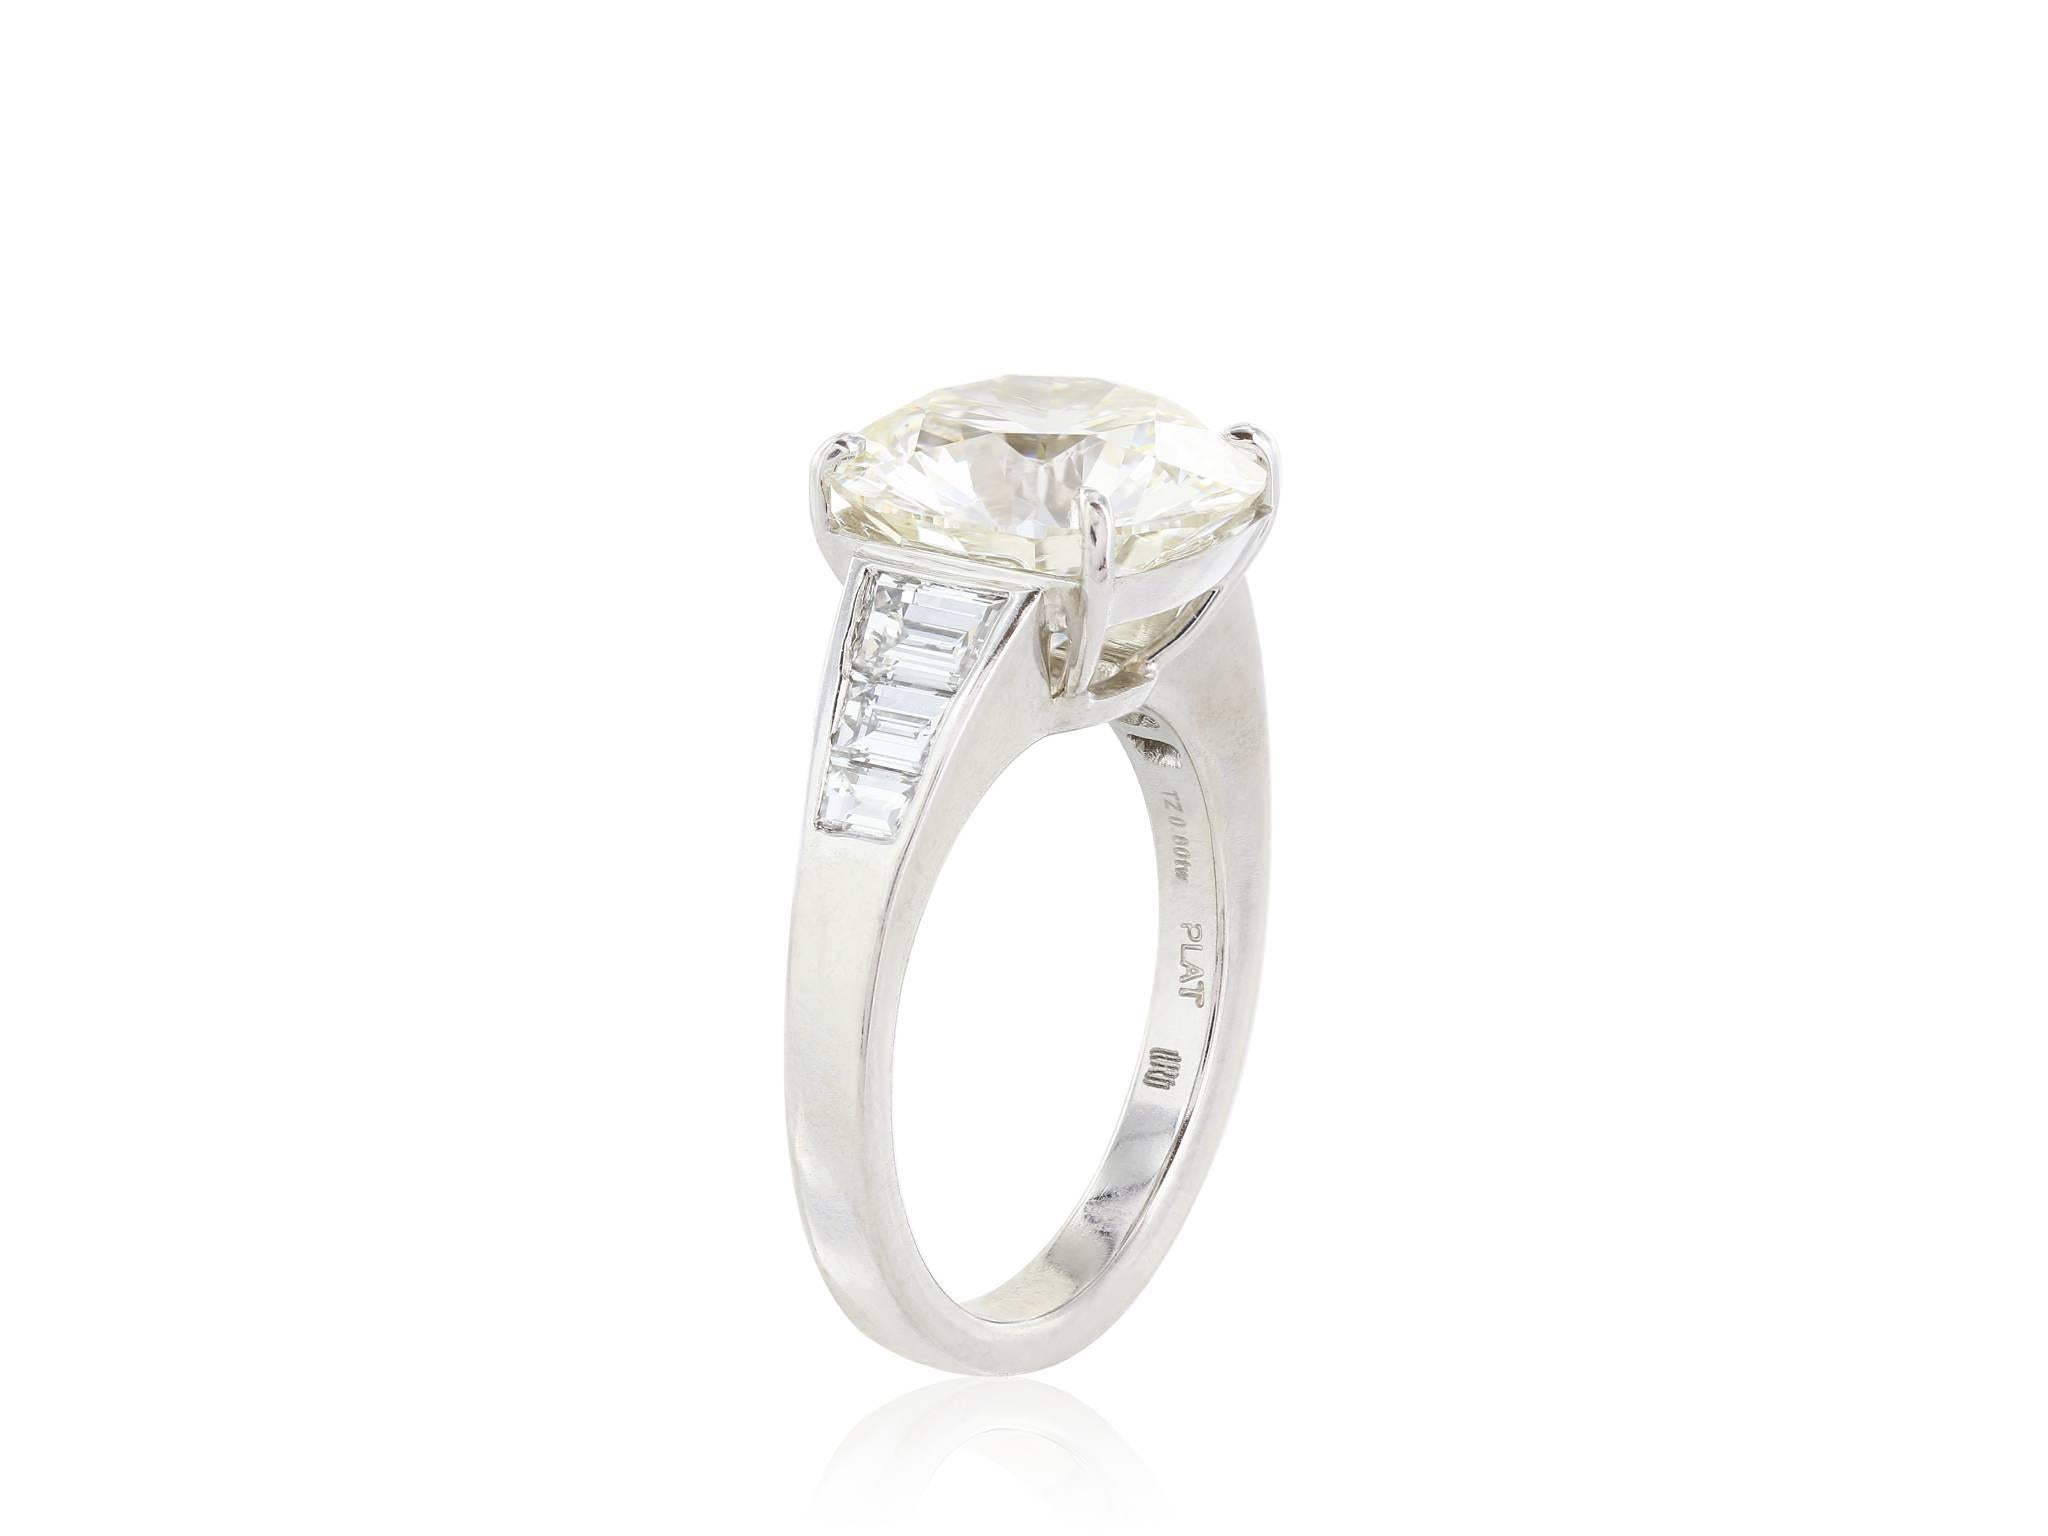 Platinum set diamond ring, featuring one GIA certified 5.60 carat round brilliant cut diamond having a color and clarity of J/SI1 (GIA cert#5151786069). The diamond is flanked by six trapezoid cut diamonds with a combined weight of .80 carats, a